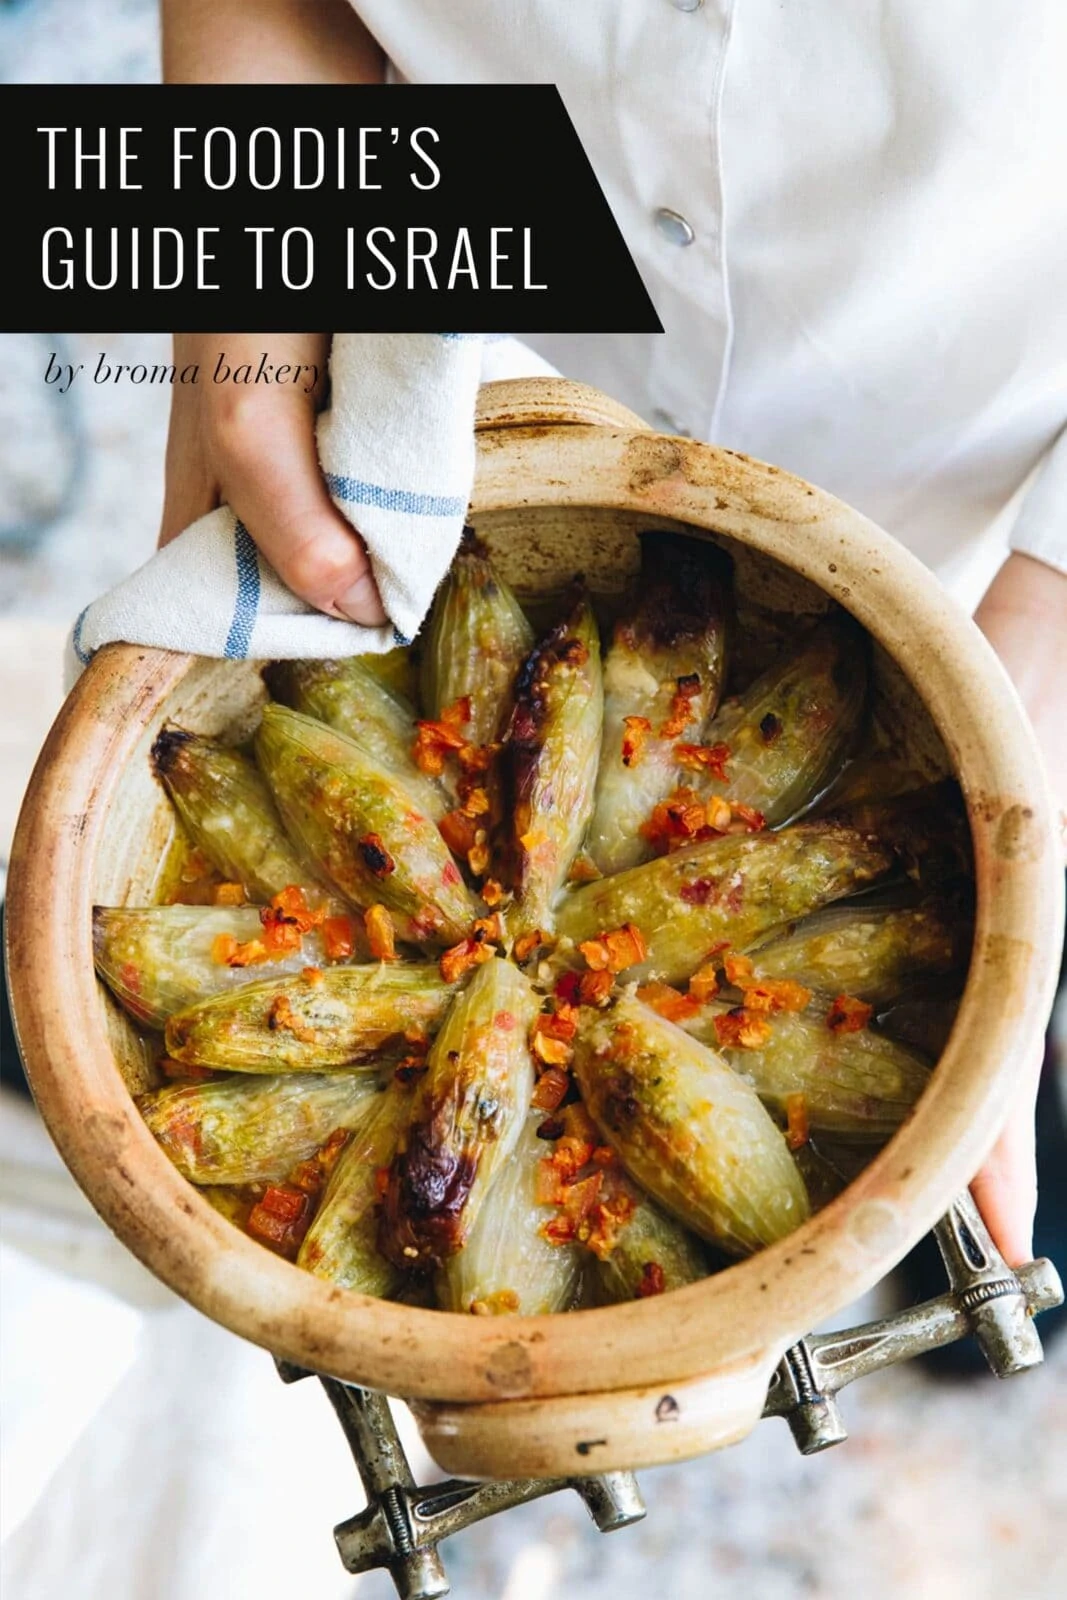 The Foodie's Guide to Israel!